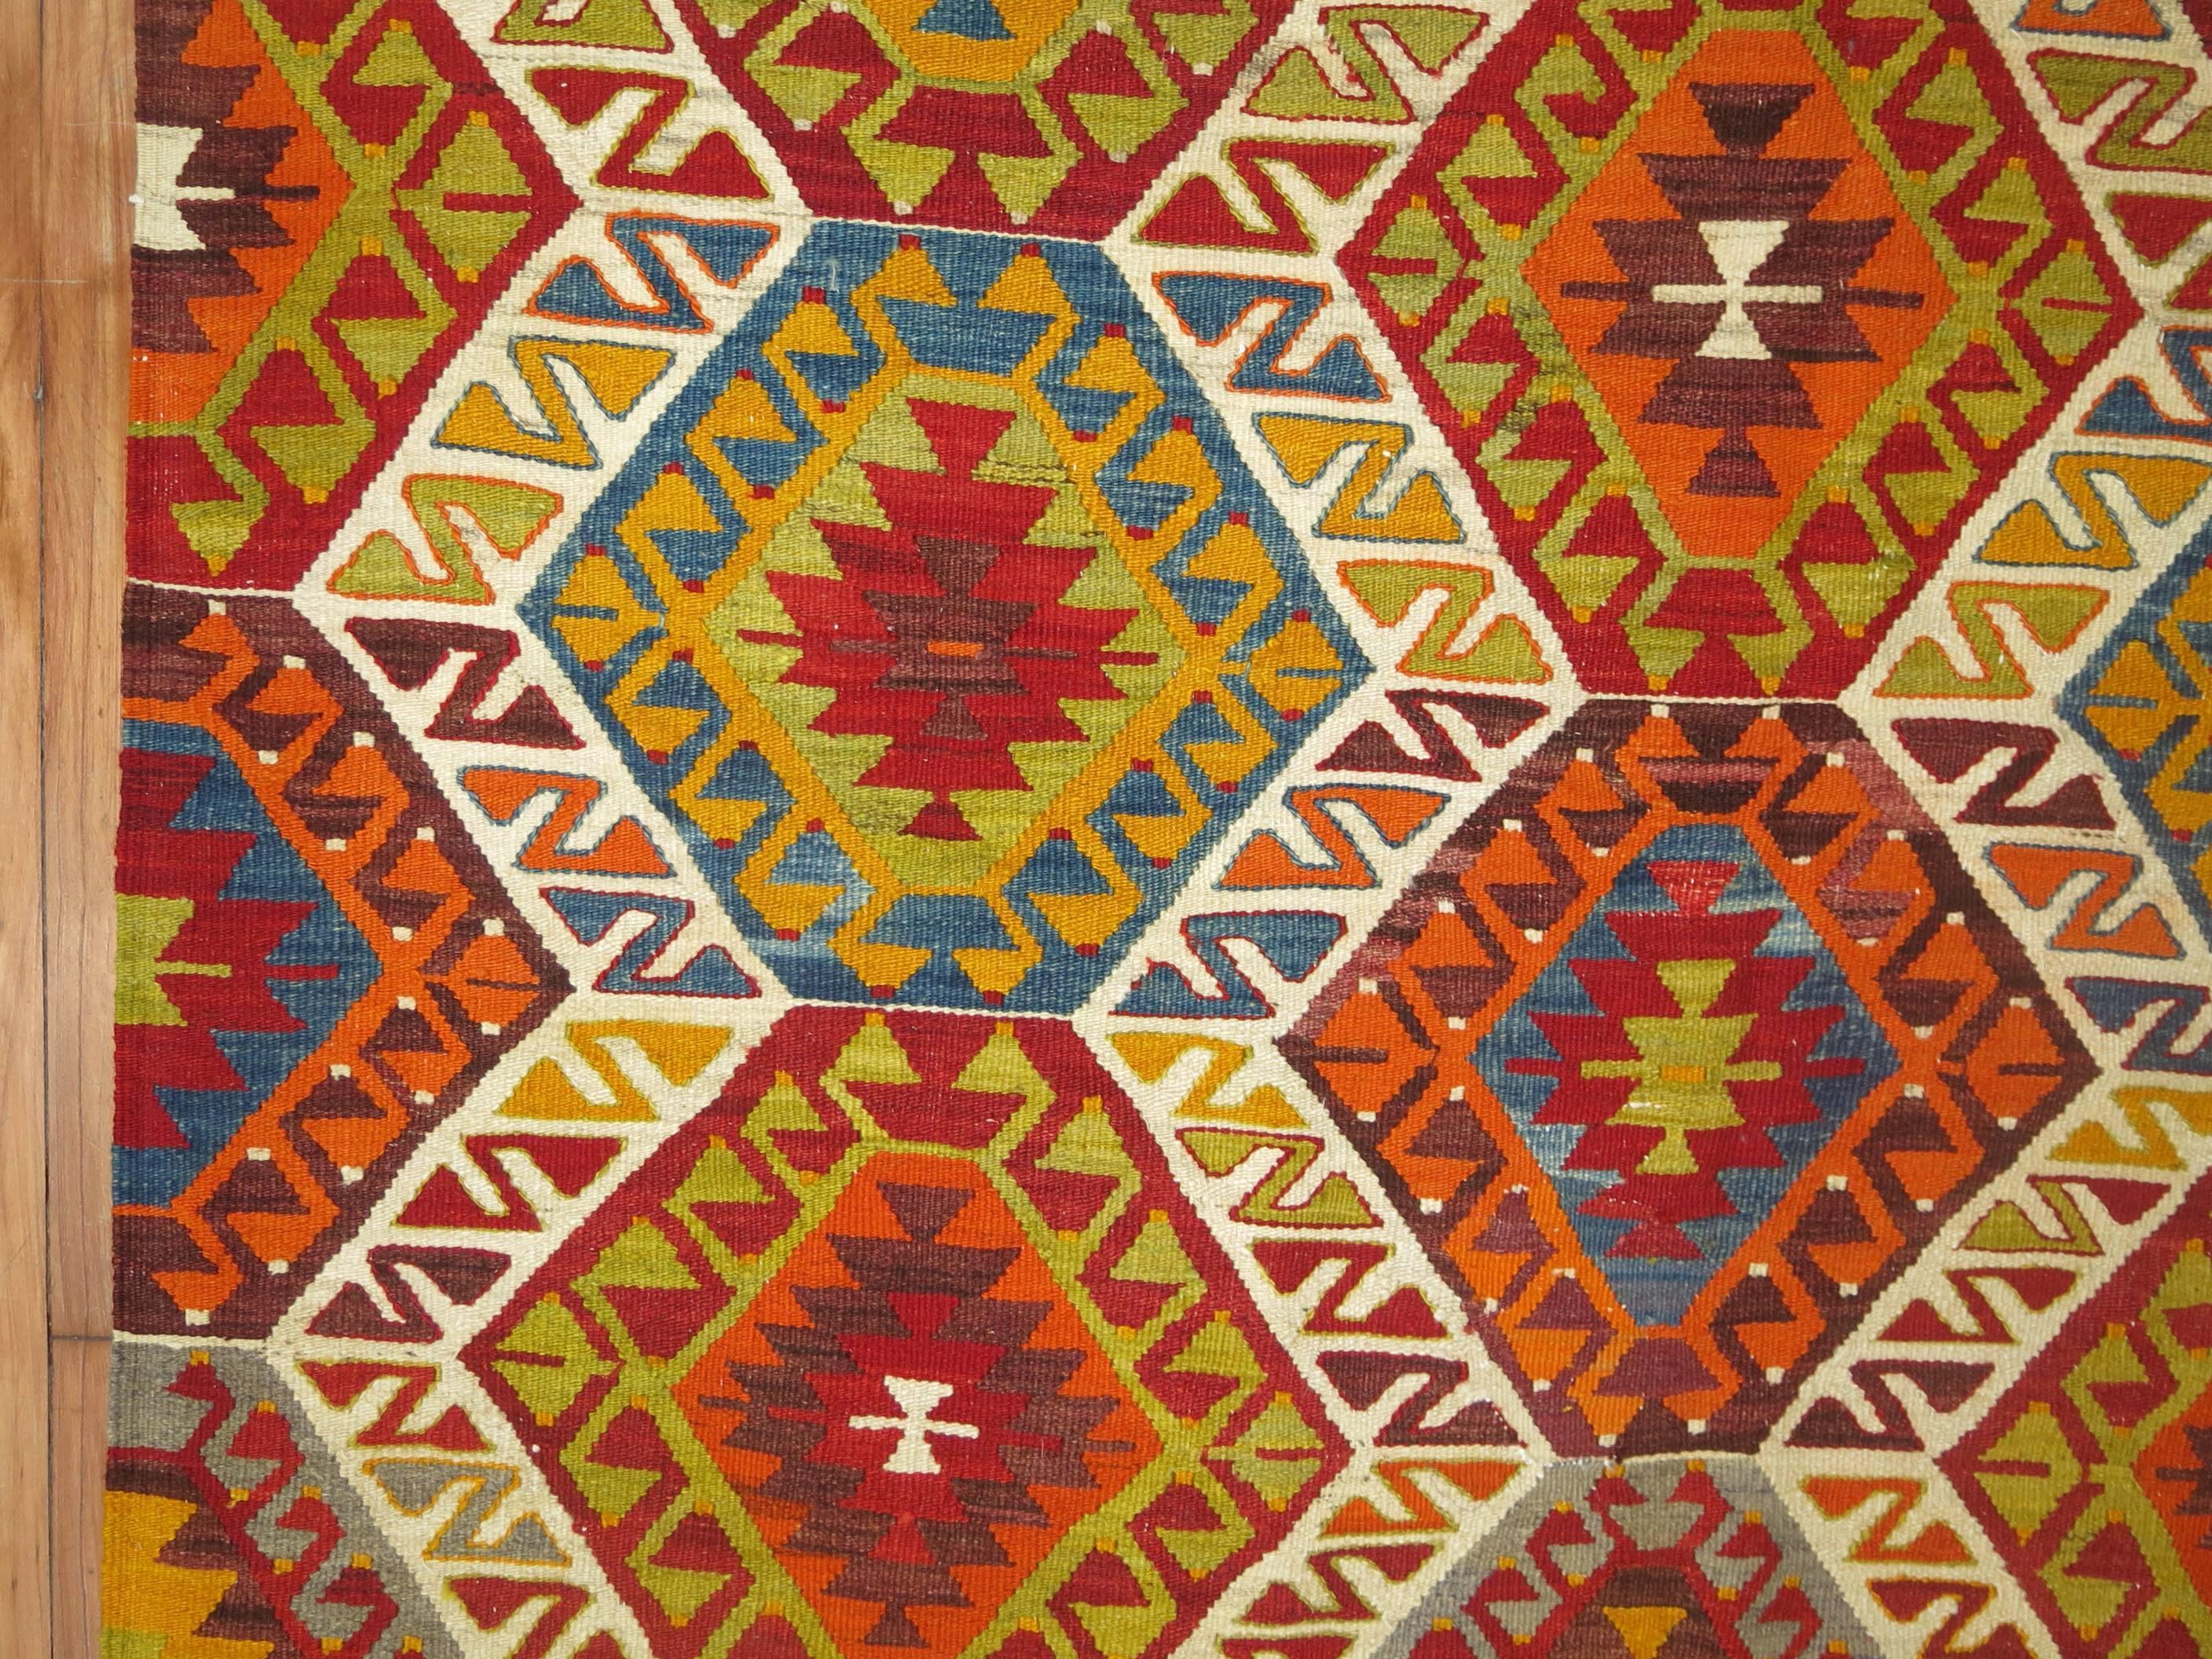 Colorful vintage Turkish Kilim flat-weave from the mid-20th century. Cherry red, chartreuse, and orange dominant accents on a ivory ground,

circa 1940, measures: 5'8